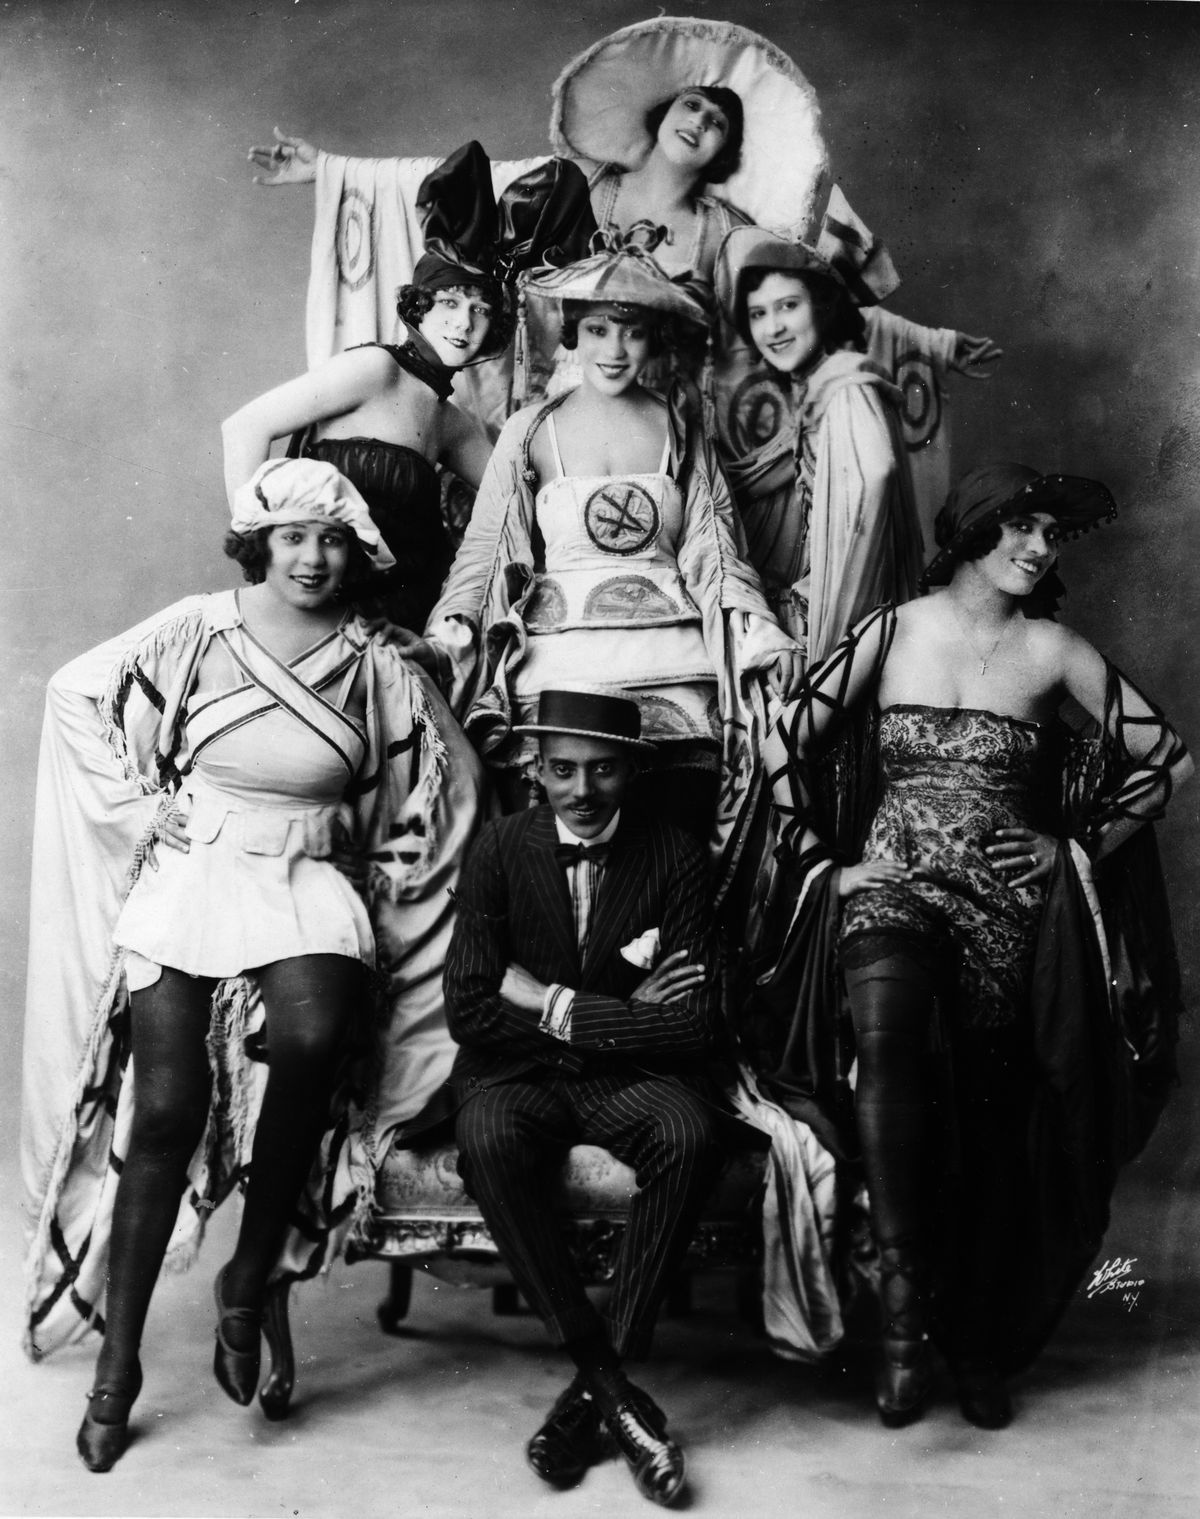 Noble Sissle with the show’s chorines in a publicity photo for the 1921 production of “Shuffle Along.”